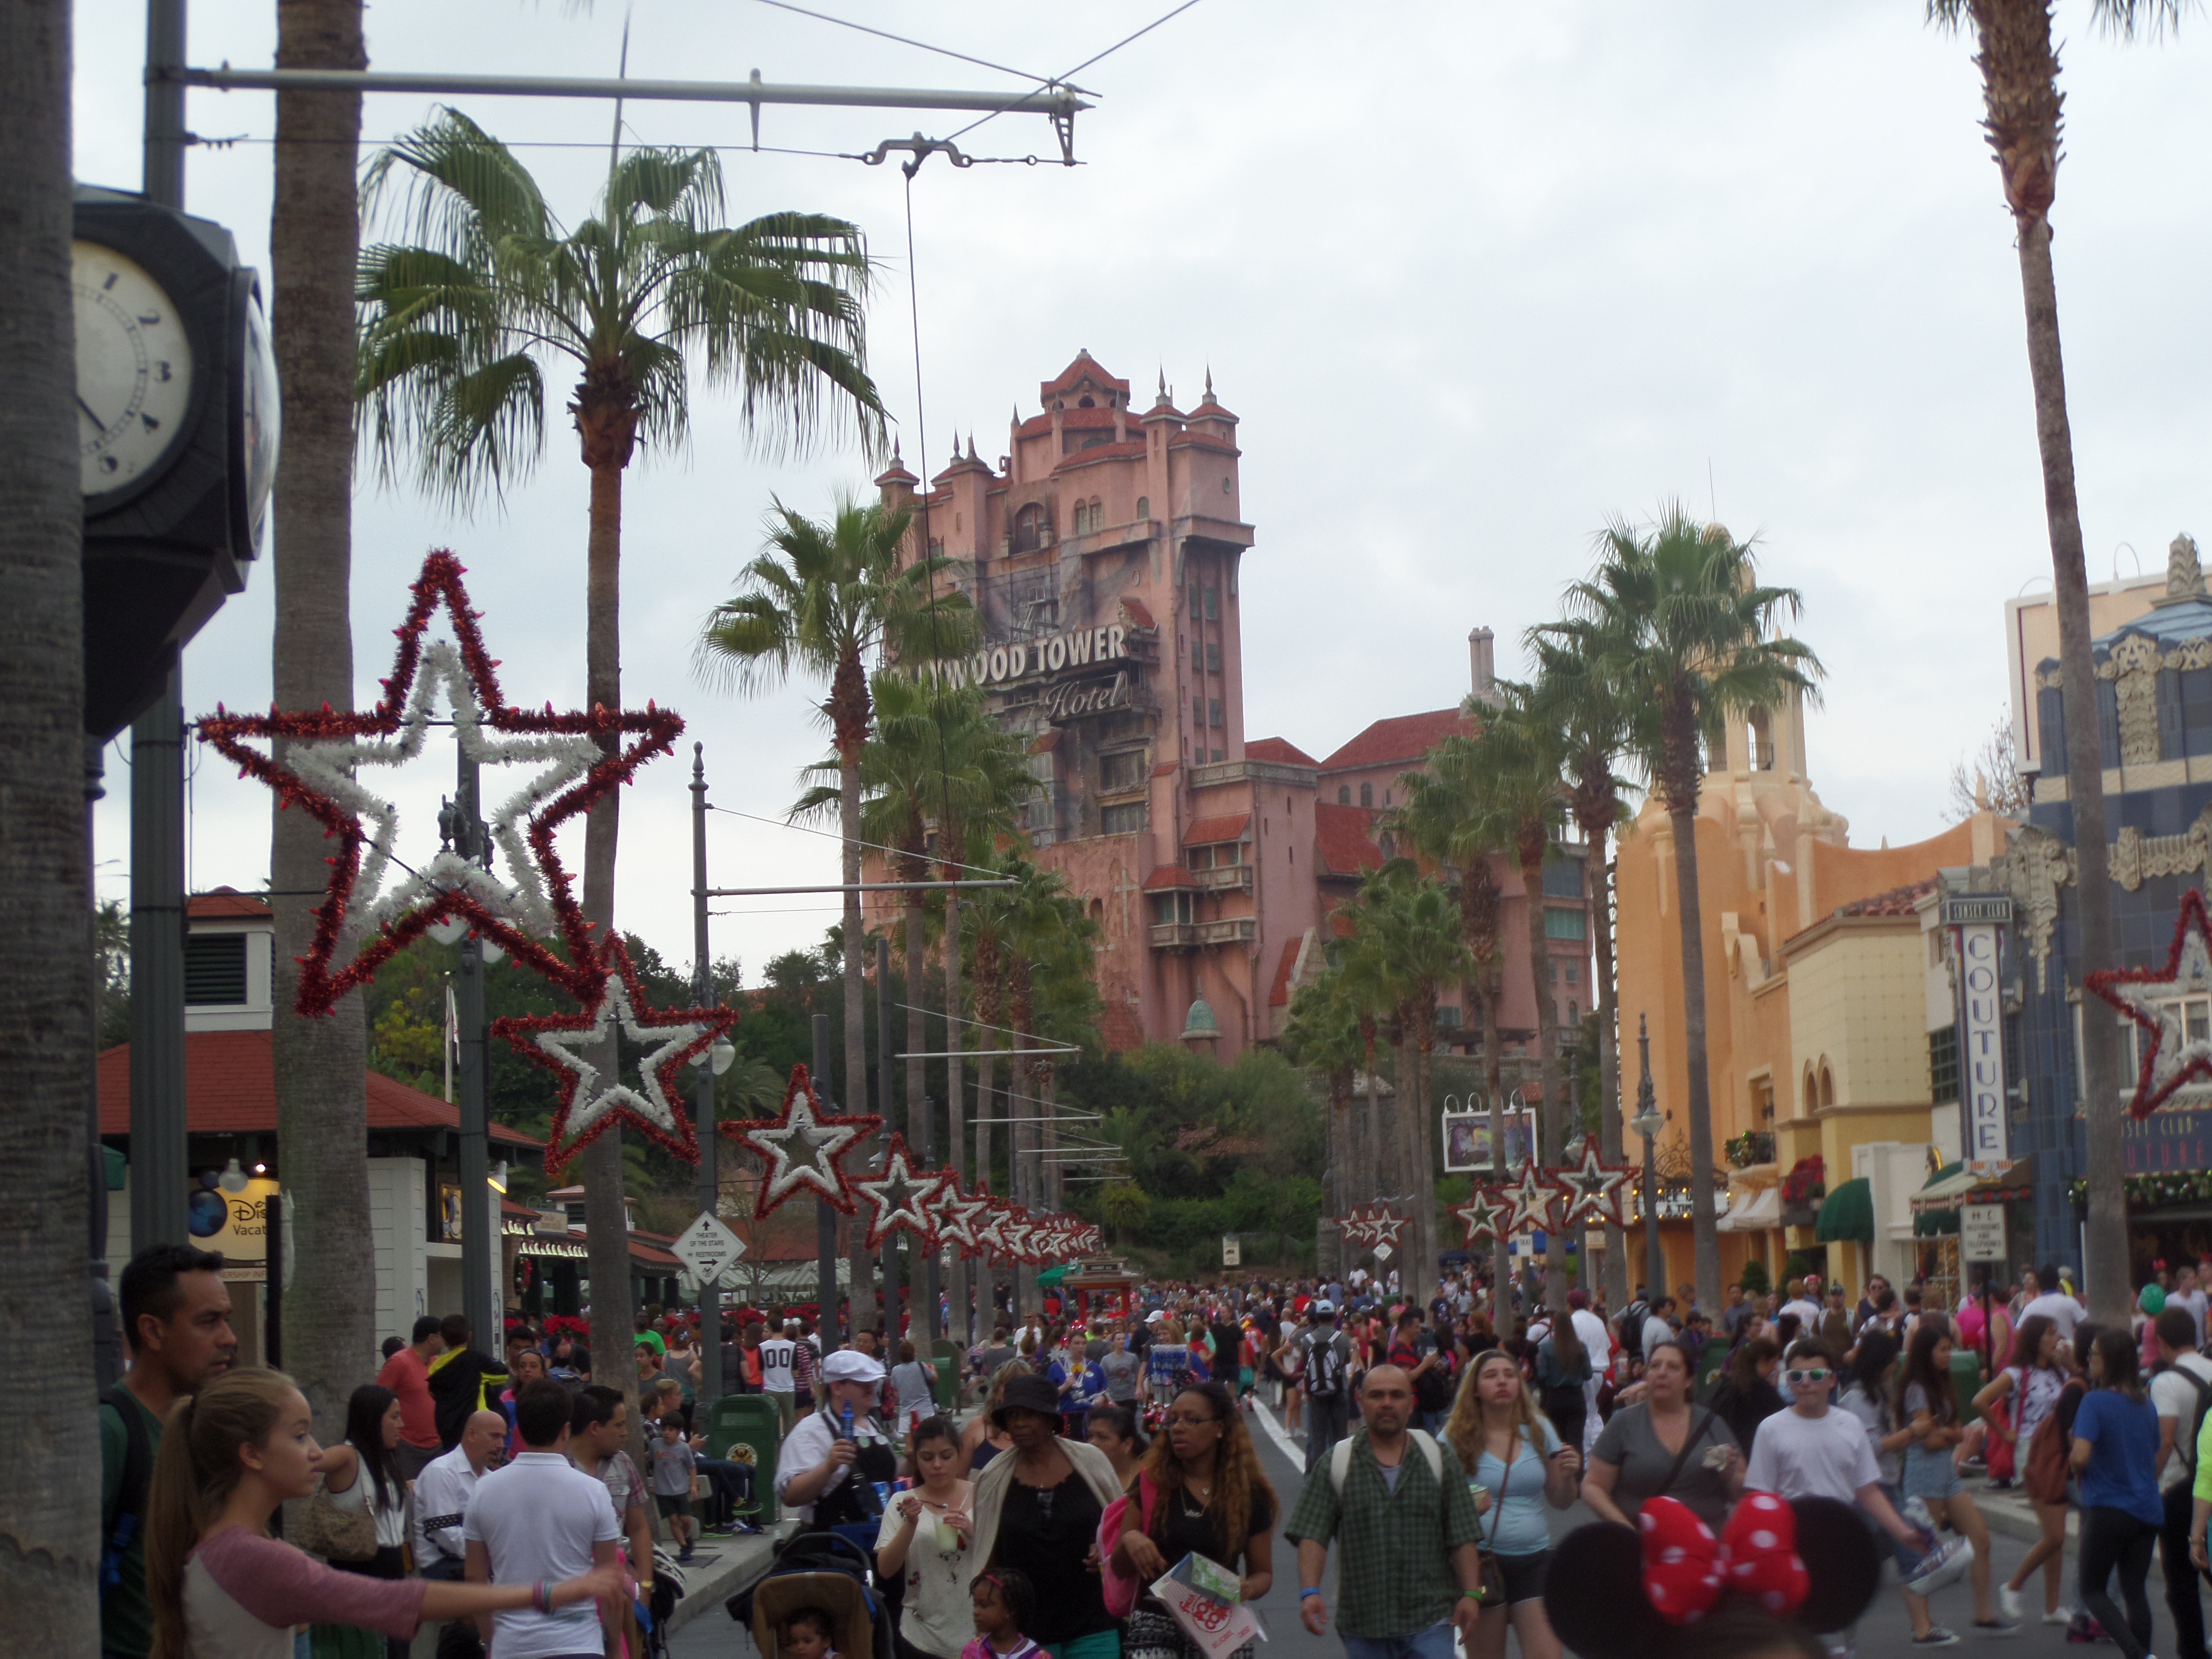 Generally speaking, the busiest time of year to visit Walt Disney World is from January to December.